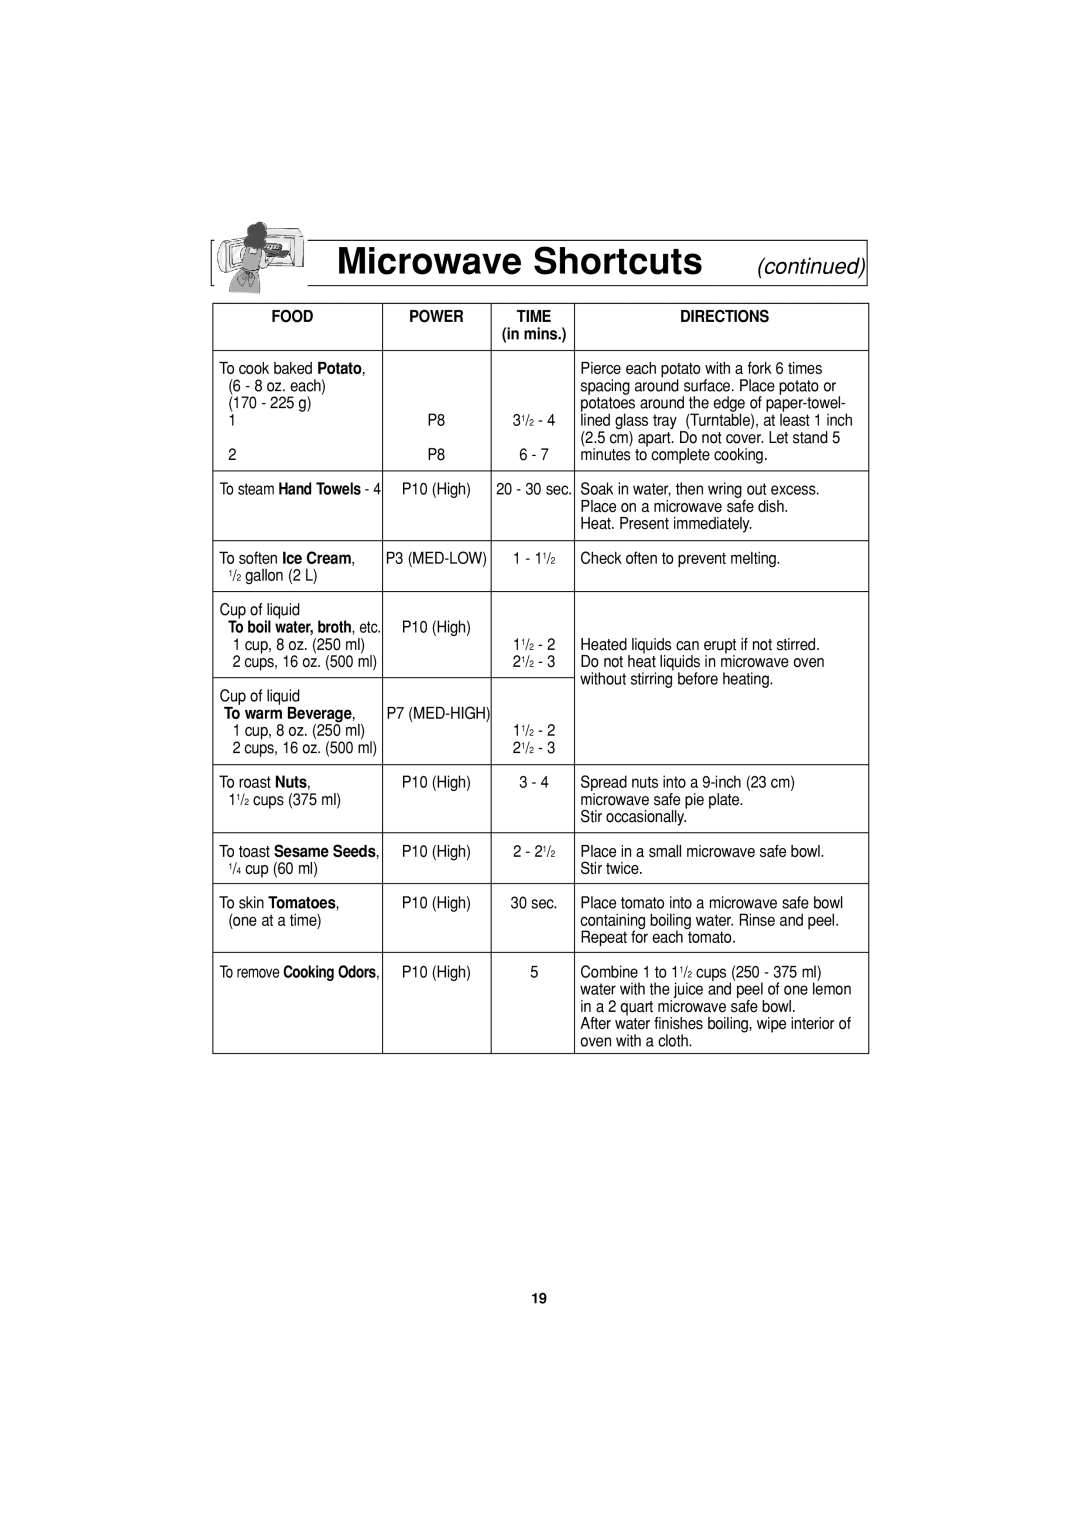 Panasonic NN-S334 important safety instructions Microwave Shortcuts, continued, Food, Directions, To warm Beverage 